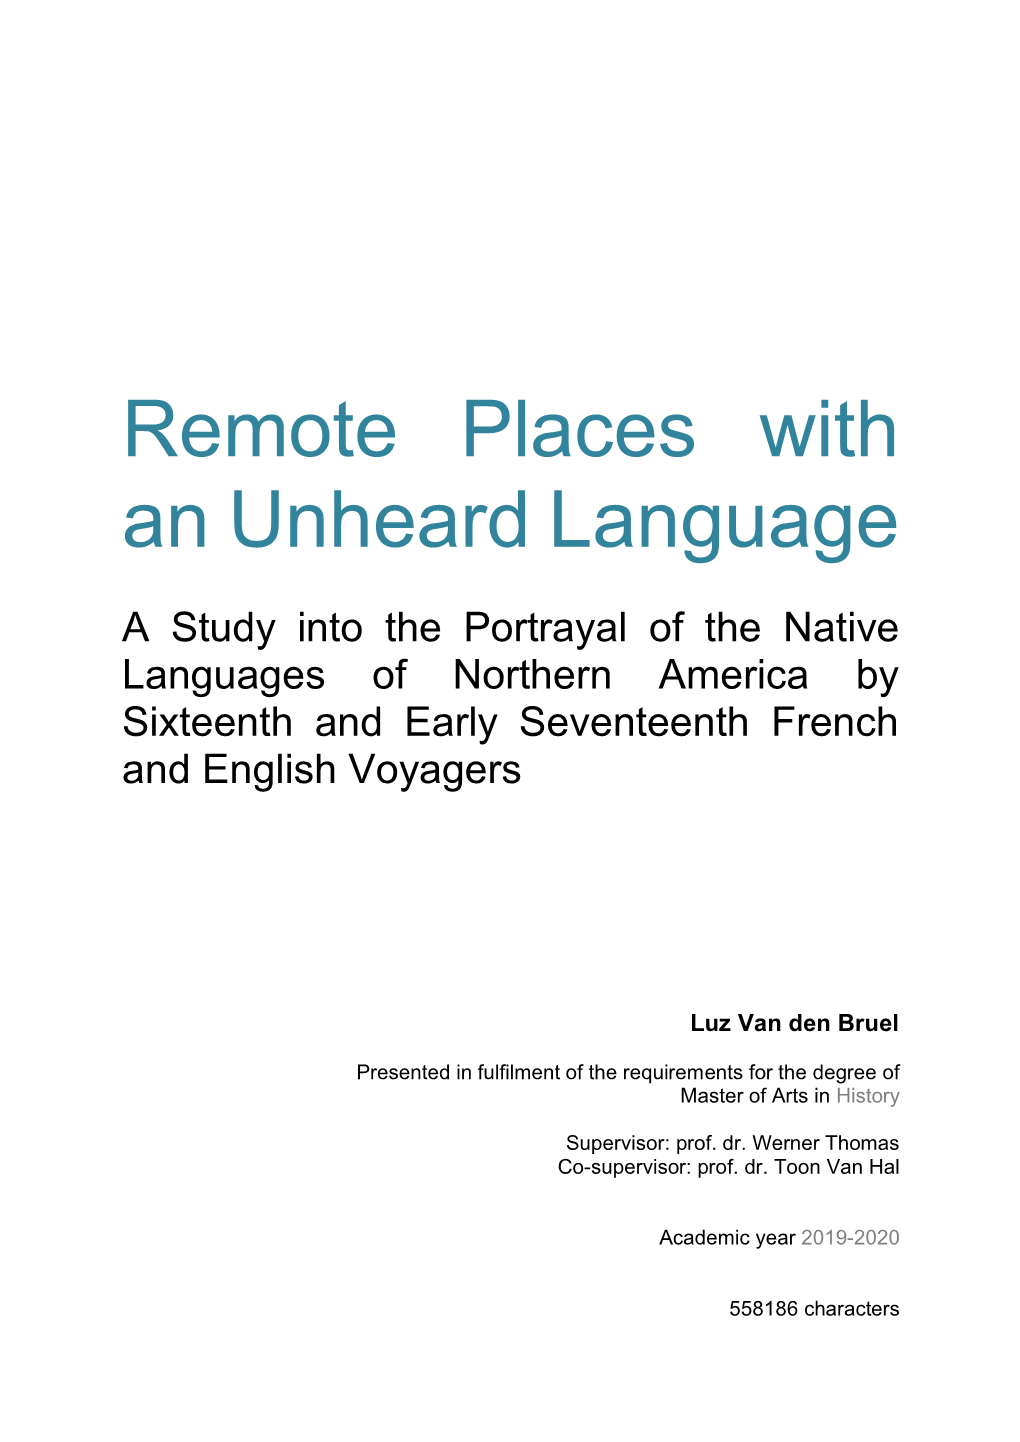 Remote Places with an Unheard Language